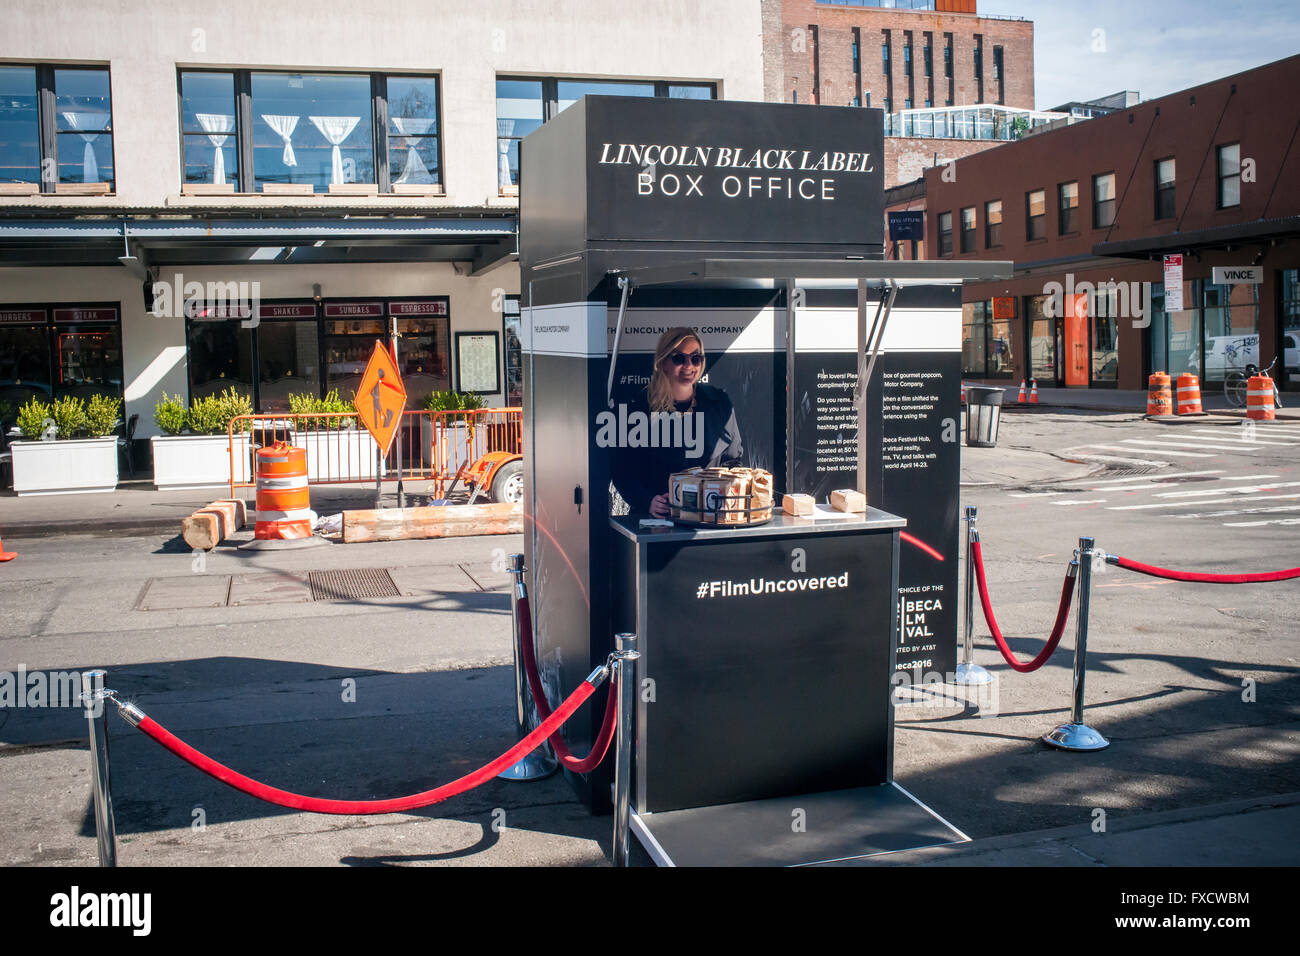 A kiosk for the Lincoln Motor Company promotes their sponsorship of the Tribeca Film Festival in the Meatpacking District in New York on Tuesday, April 12, 2016. (© Richard B. Levine) Stock Photo